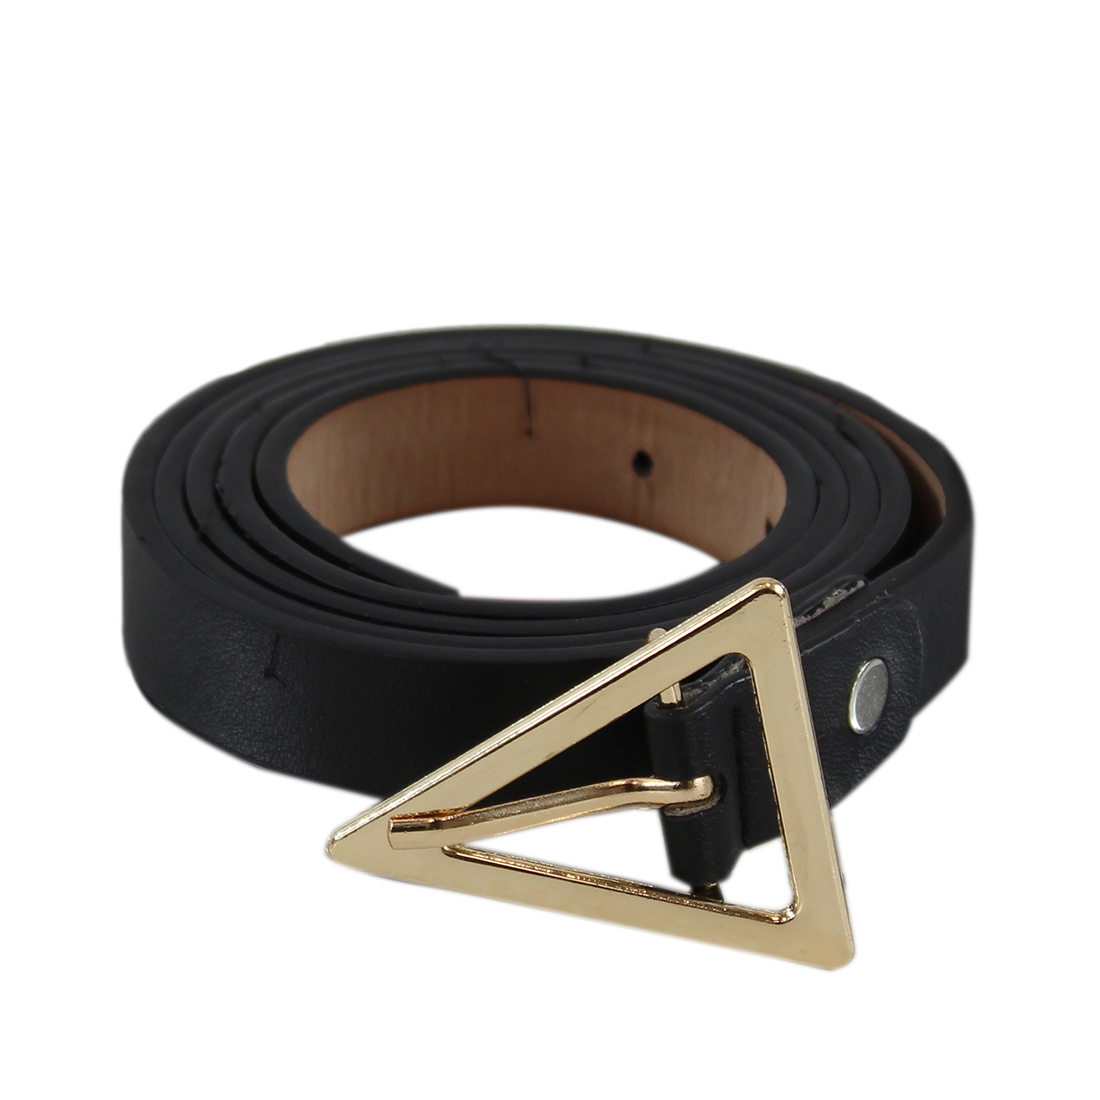 Triangle gold buckle design